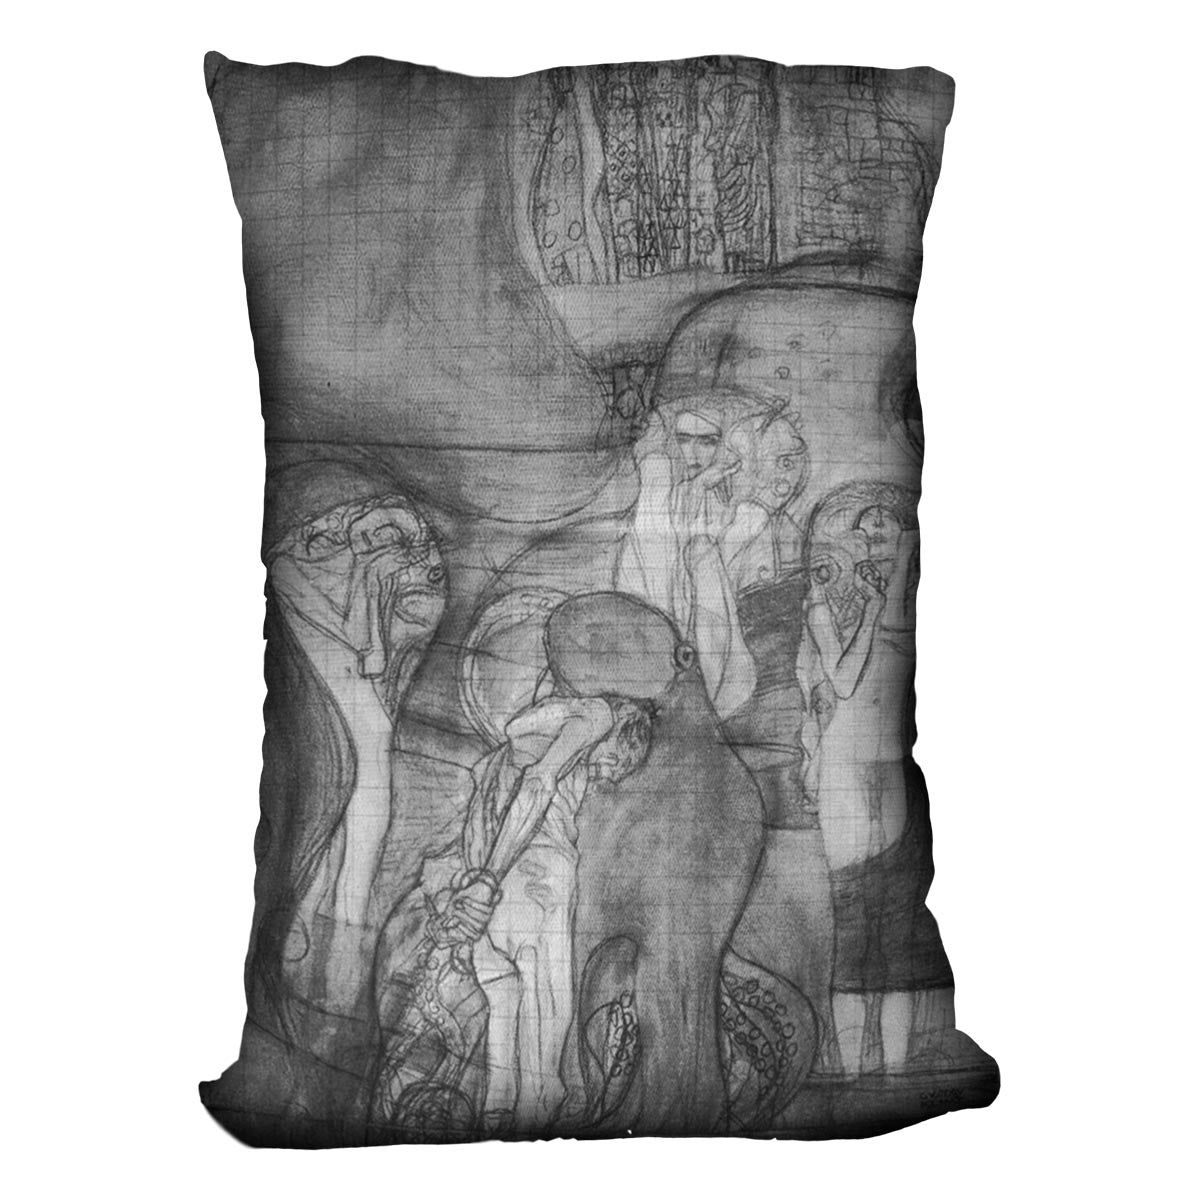 Composition draft of the law faculty image by Klimt Cushion